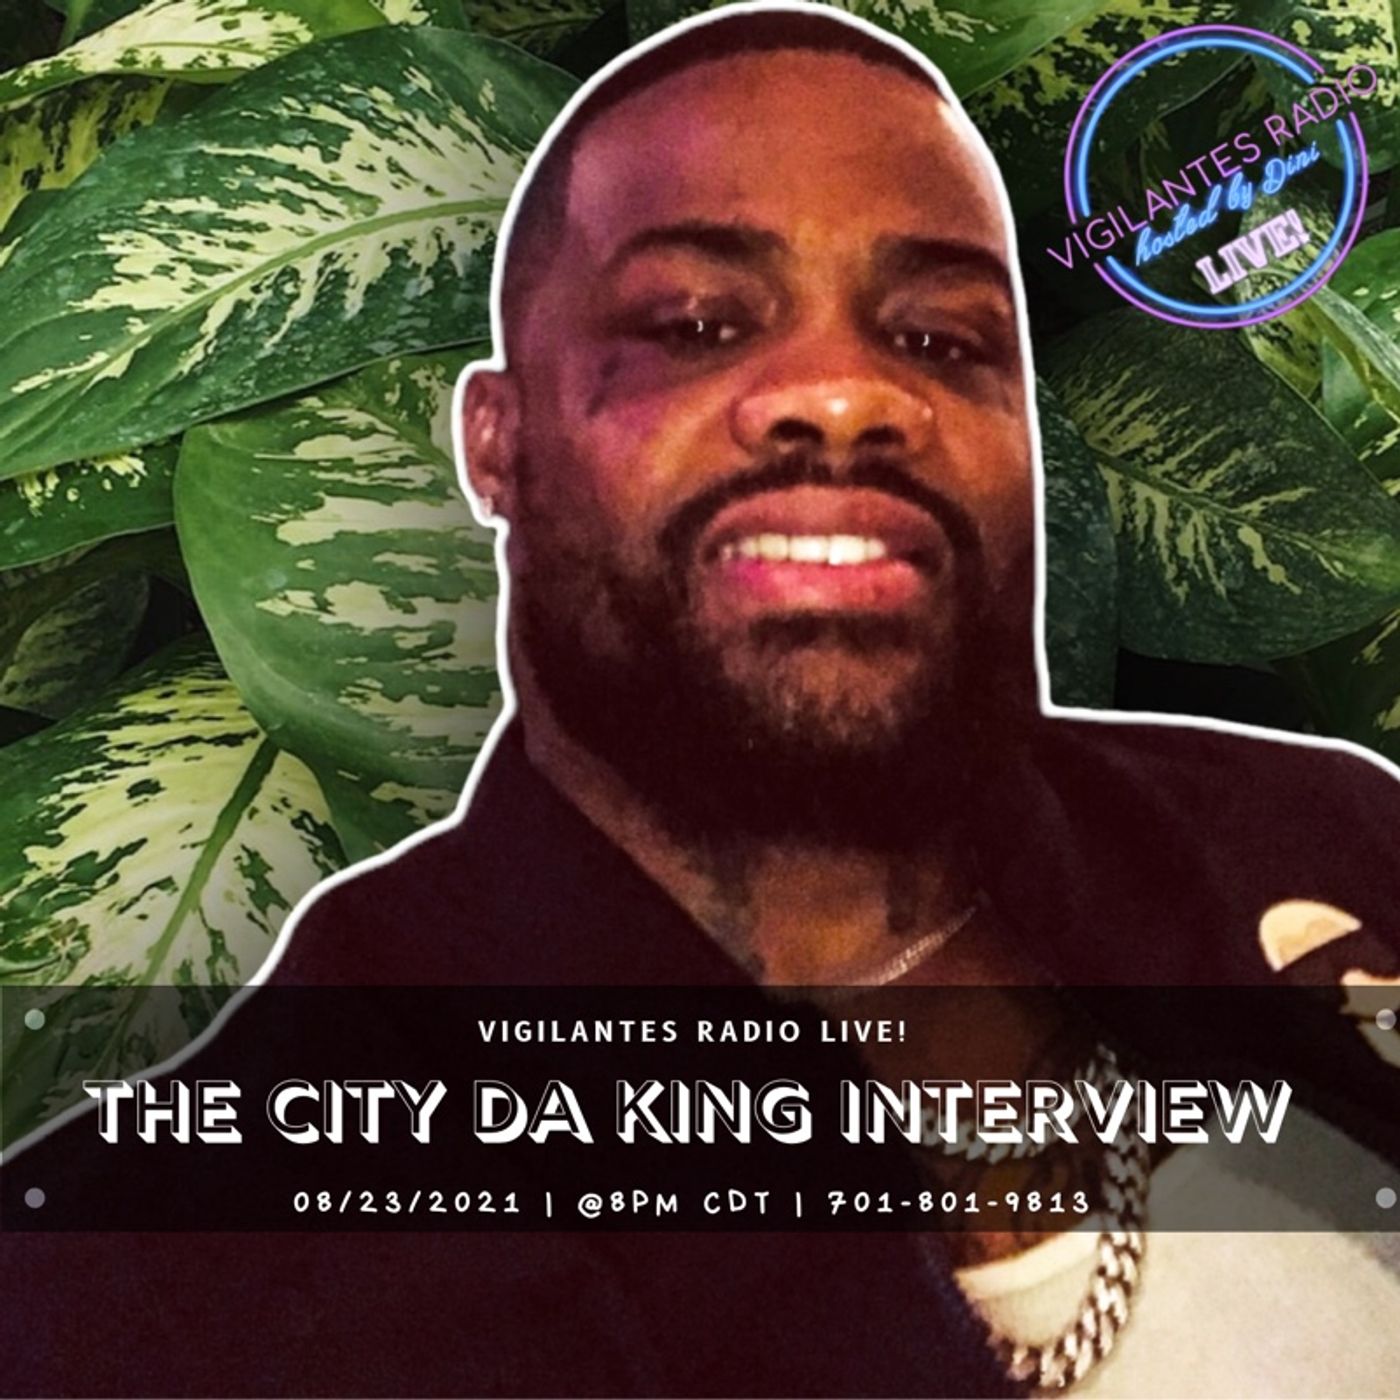 The City Da King Interview. Image